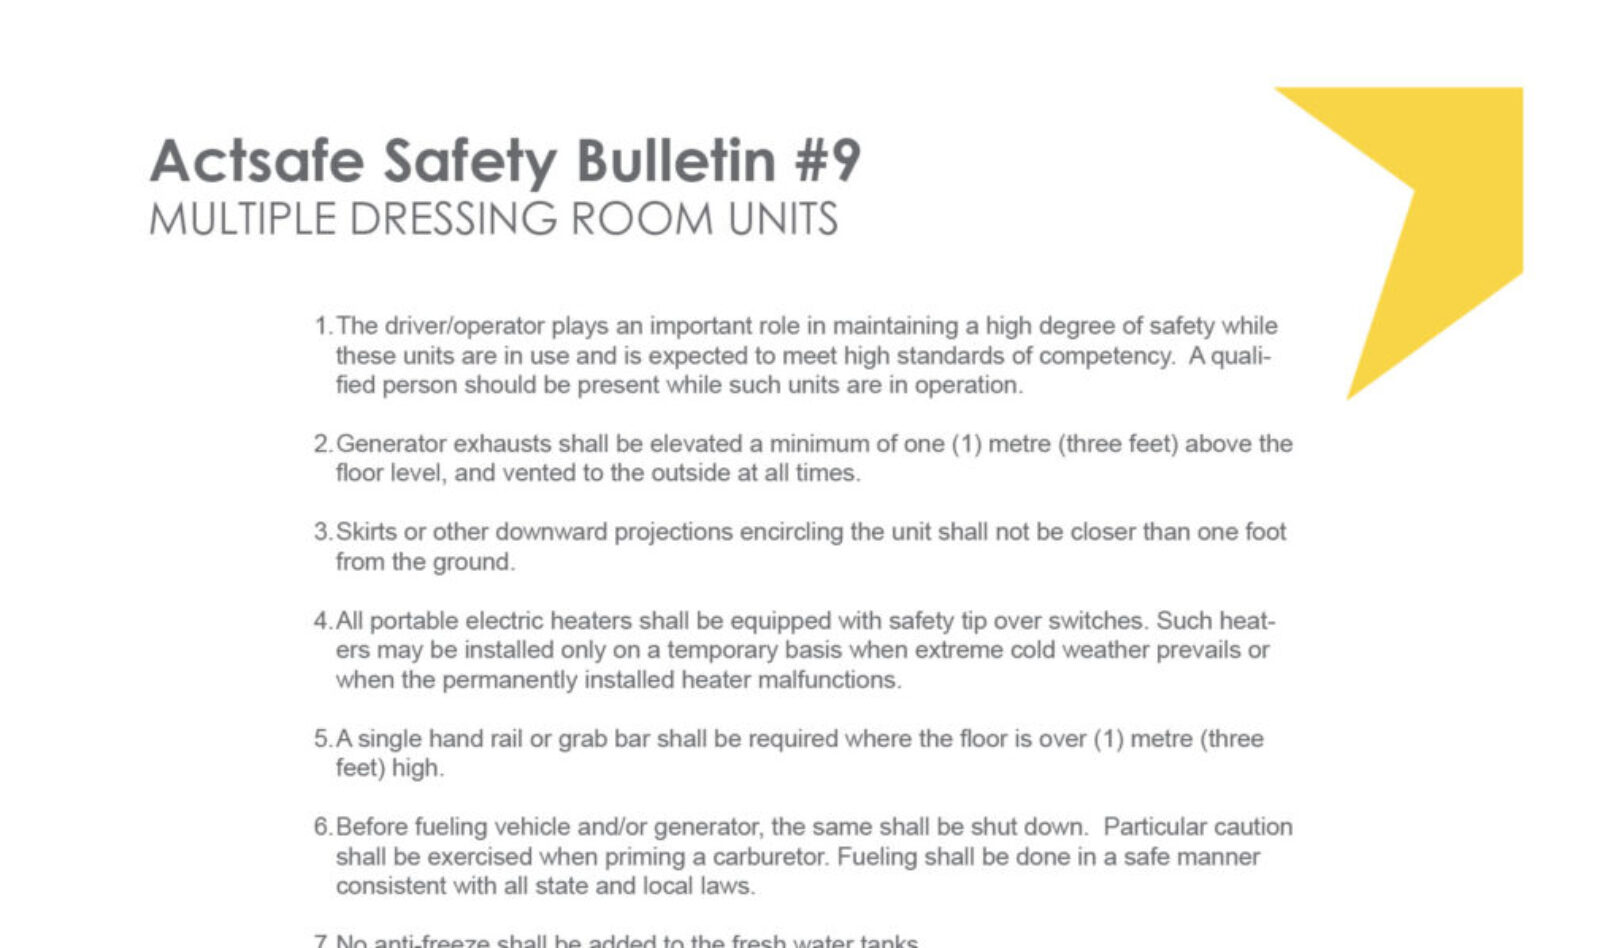 #9 Multiple Dressing Room Units Motion Picture Safety Bulletin